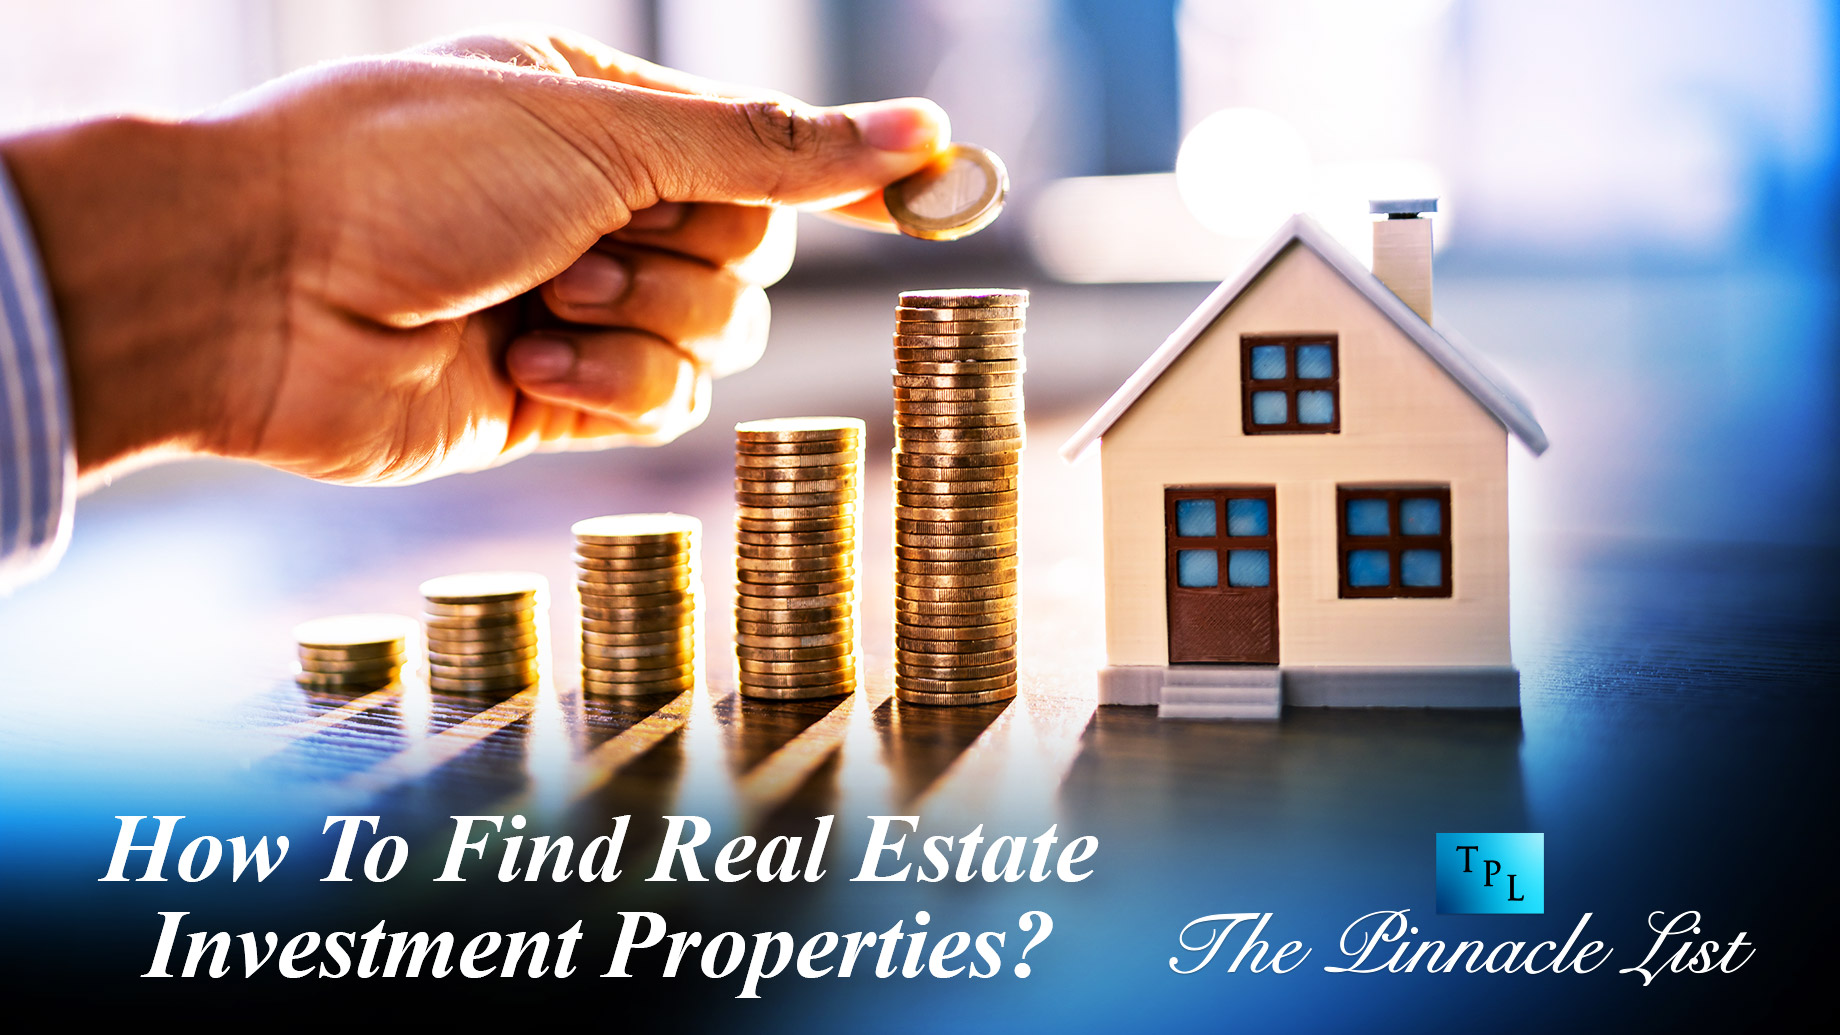 How To Find Real Estate Investment Properties?